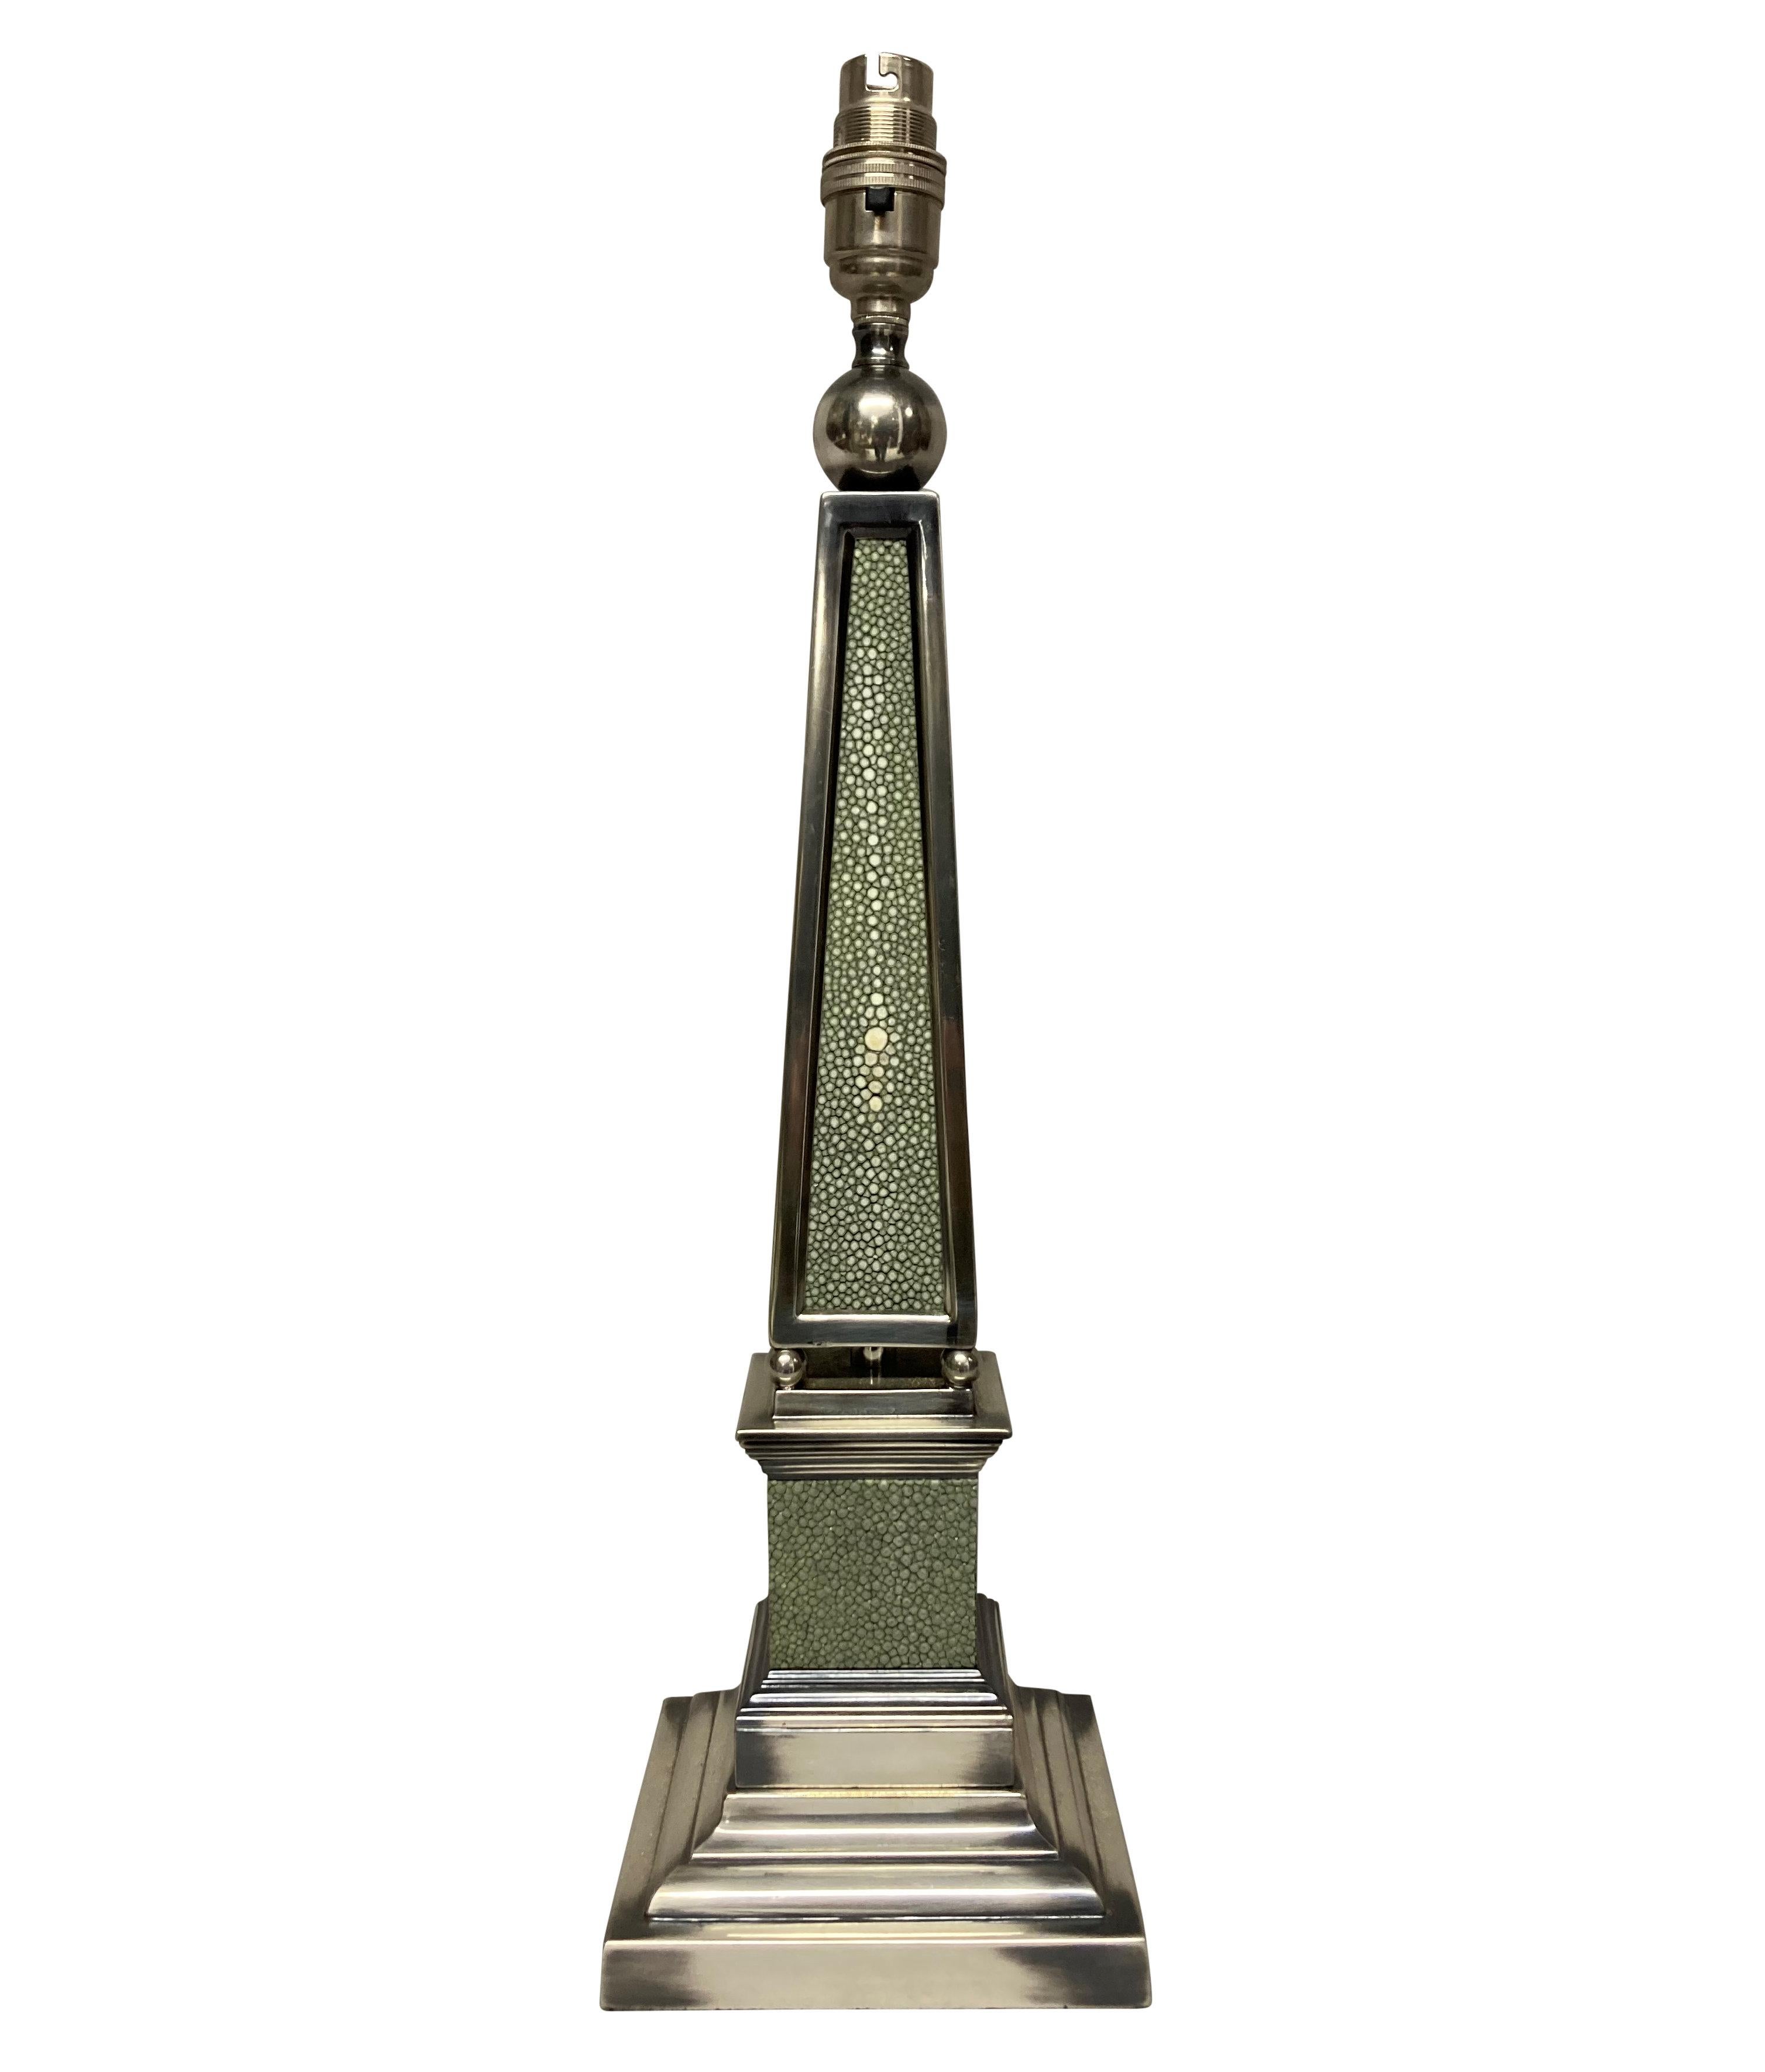 A pair of English silver-plated obelisk lamps of neo-classical design, covered in antique shagreen. Newly electrified with silk cord and in-line switches.